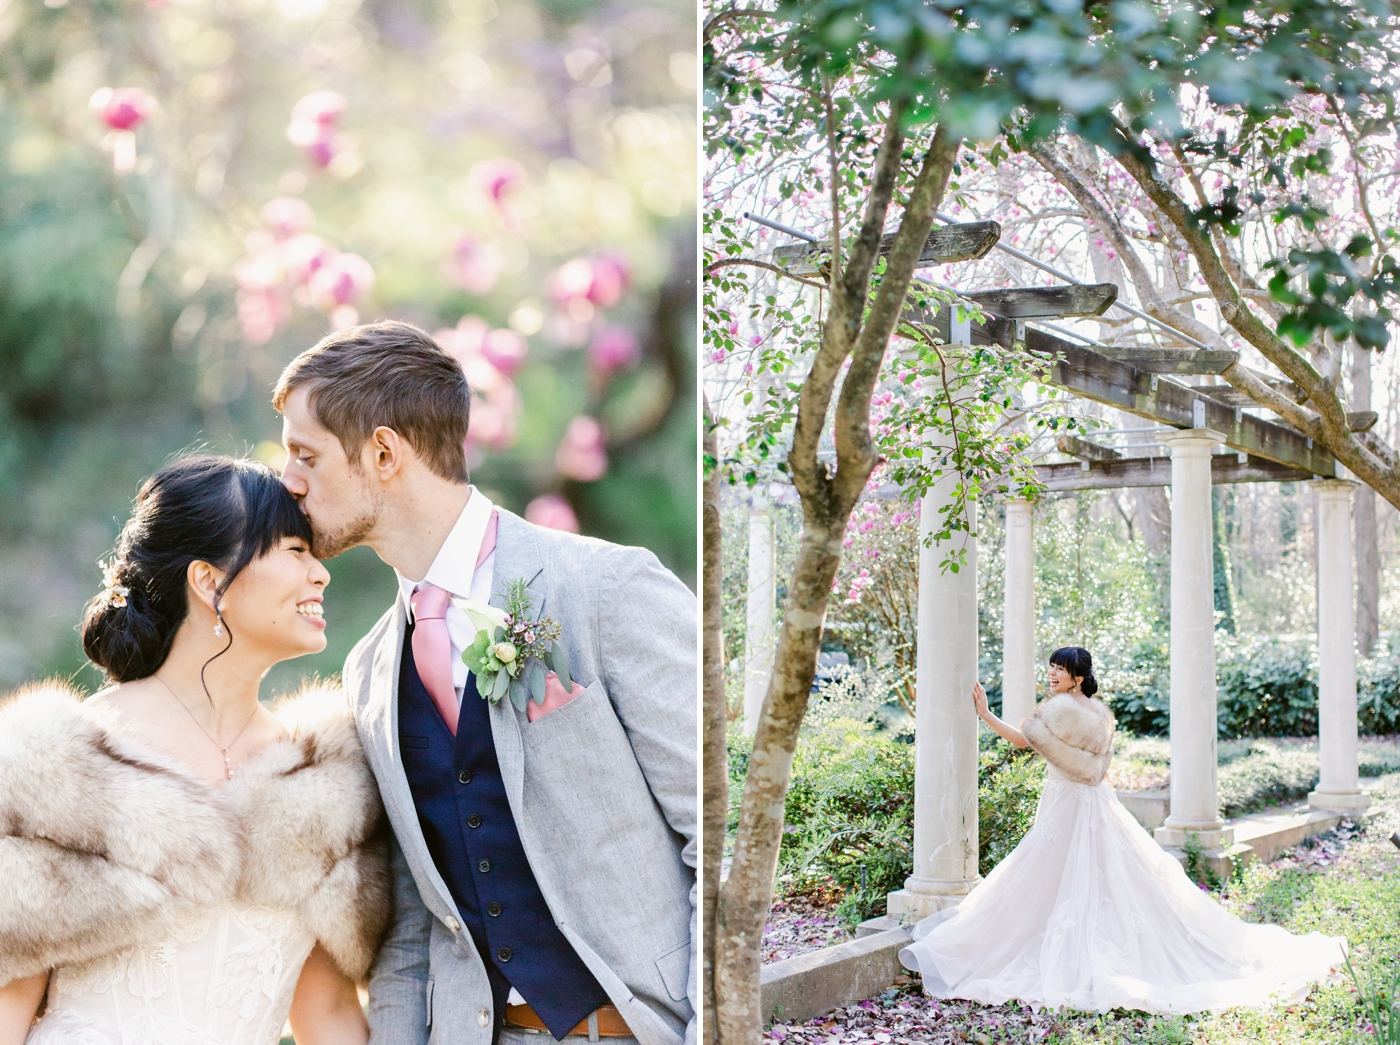 Spring Wedding at Cator Woolford Gardens